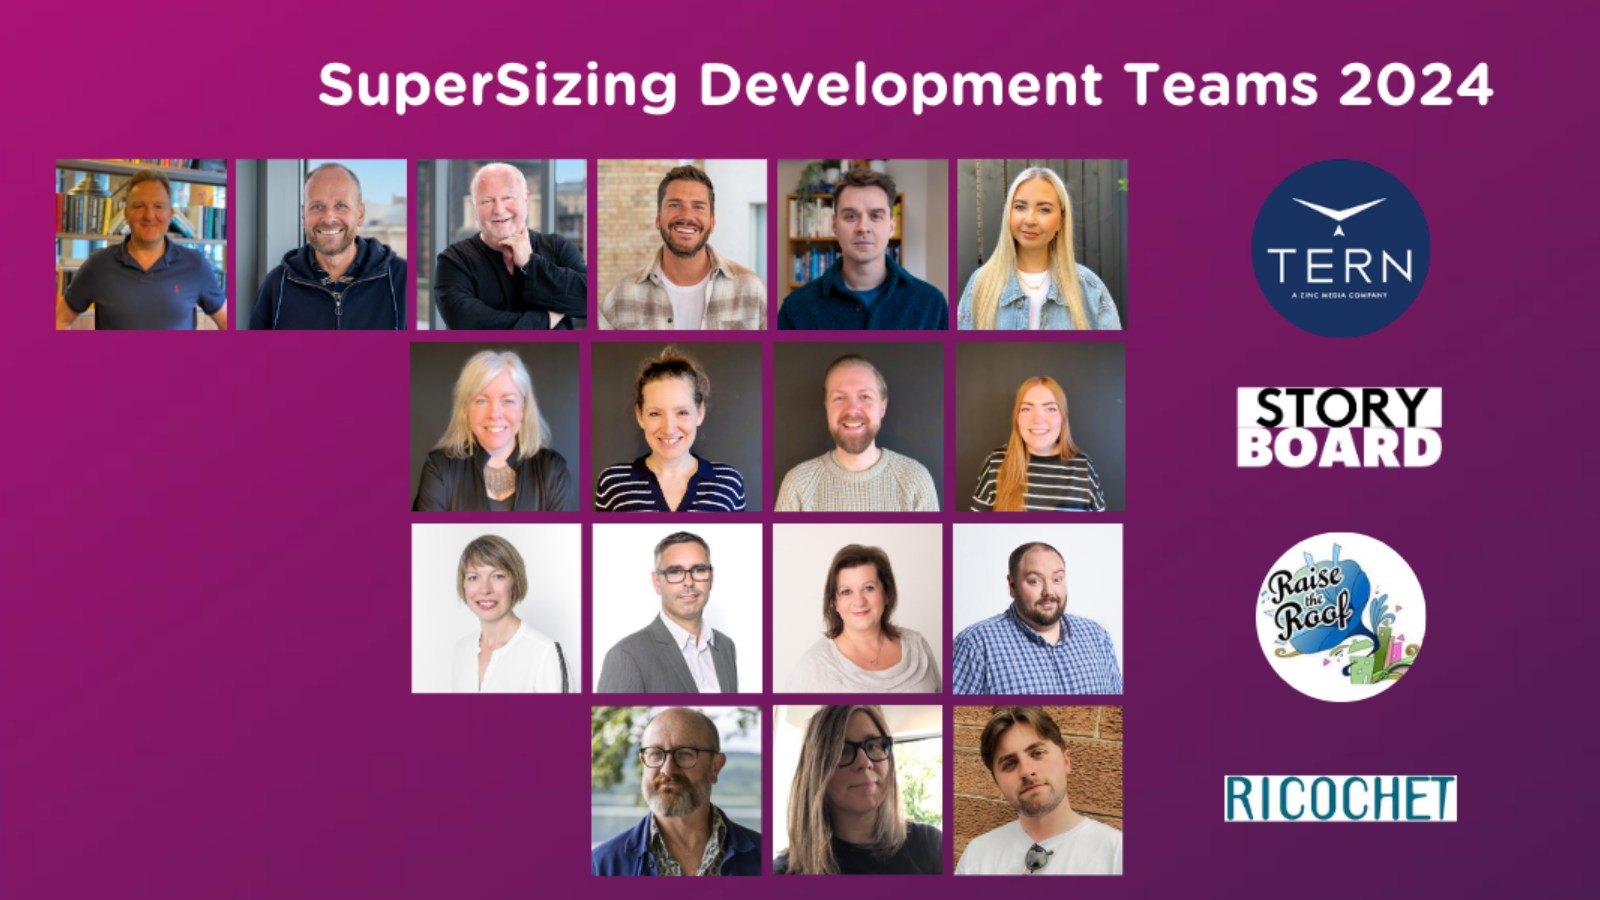 The TRC SuperSizing Development Teams for 2024 - 17 headshots of people across four rows.